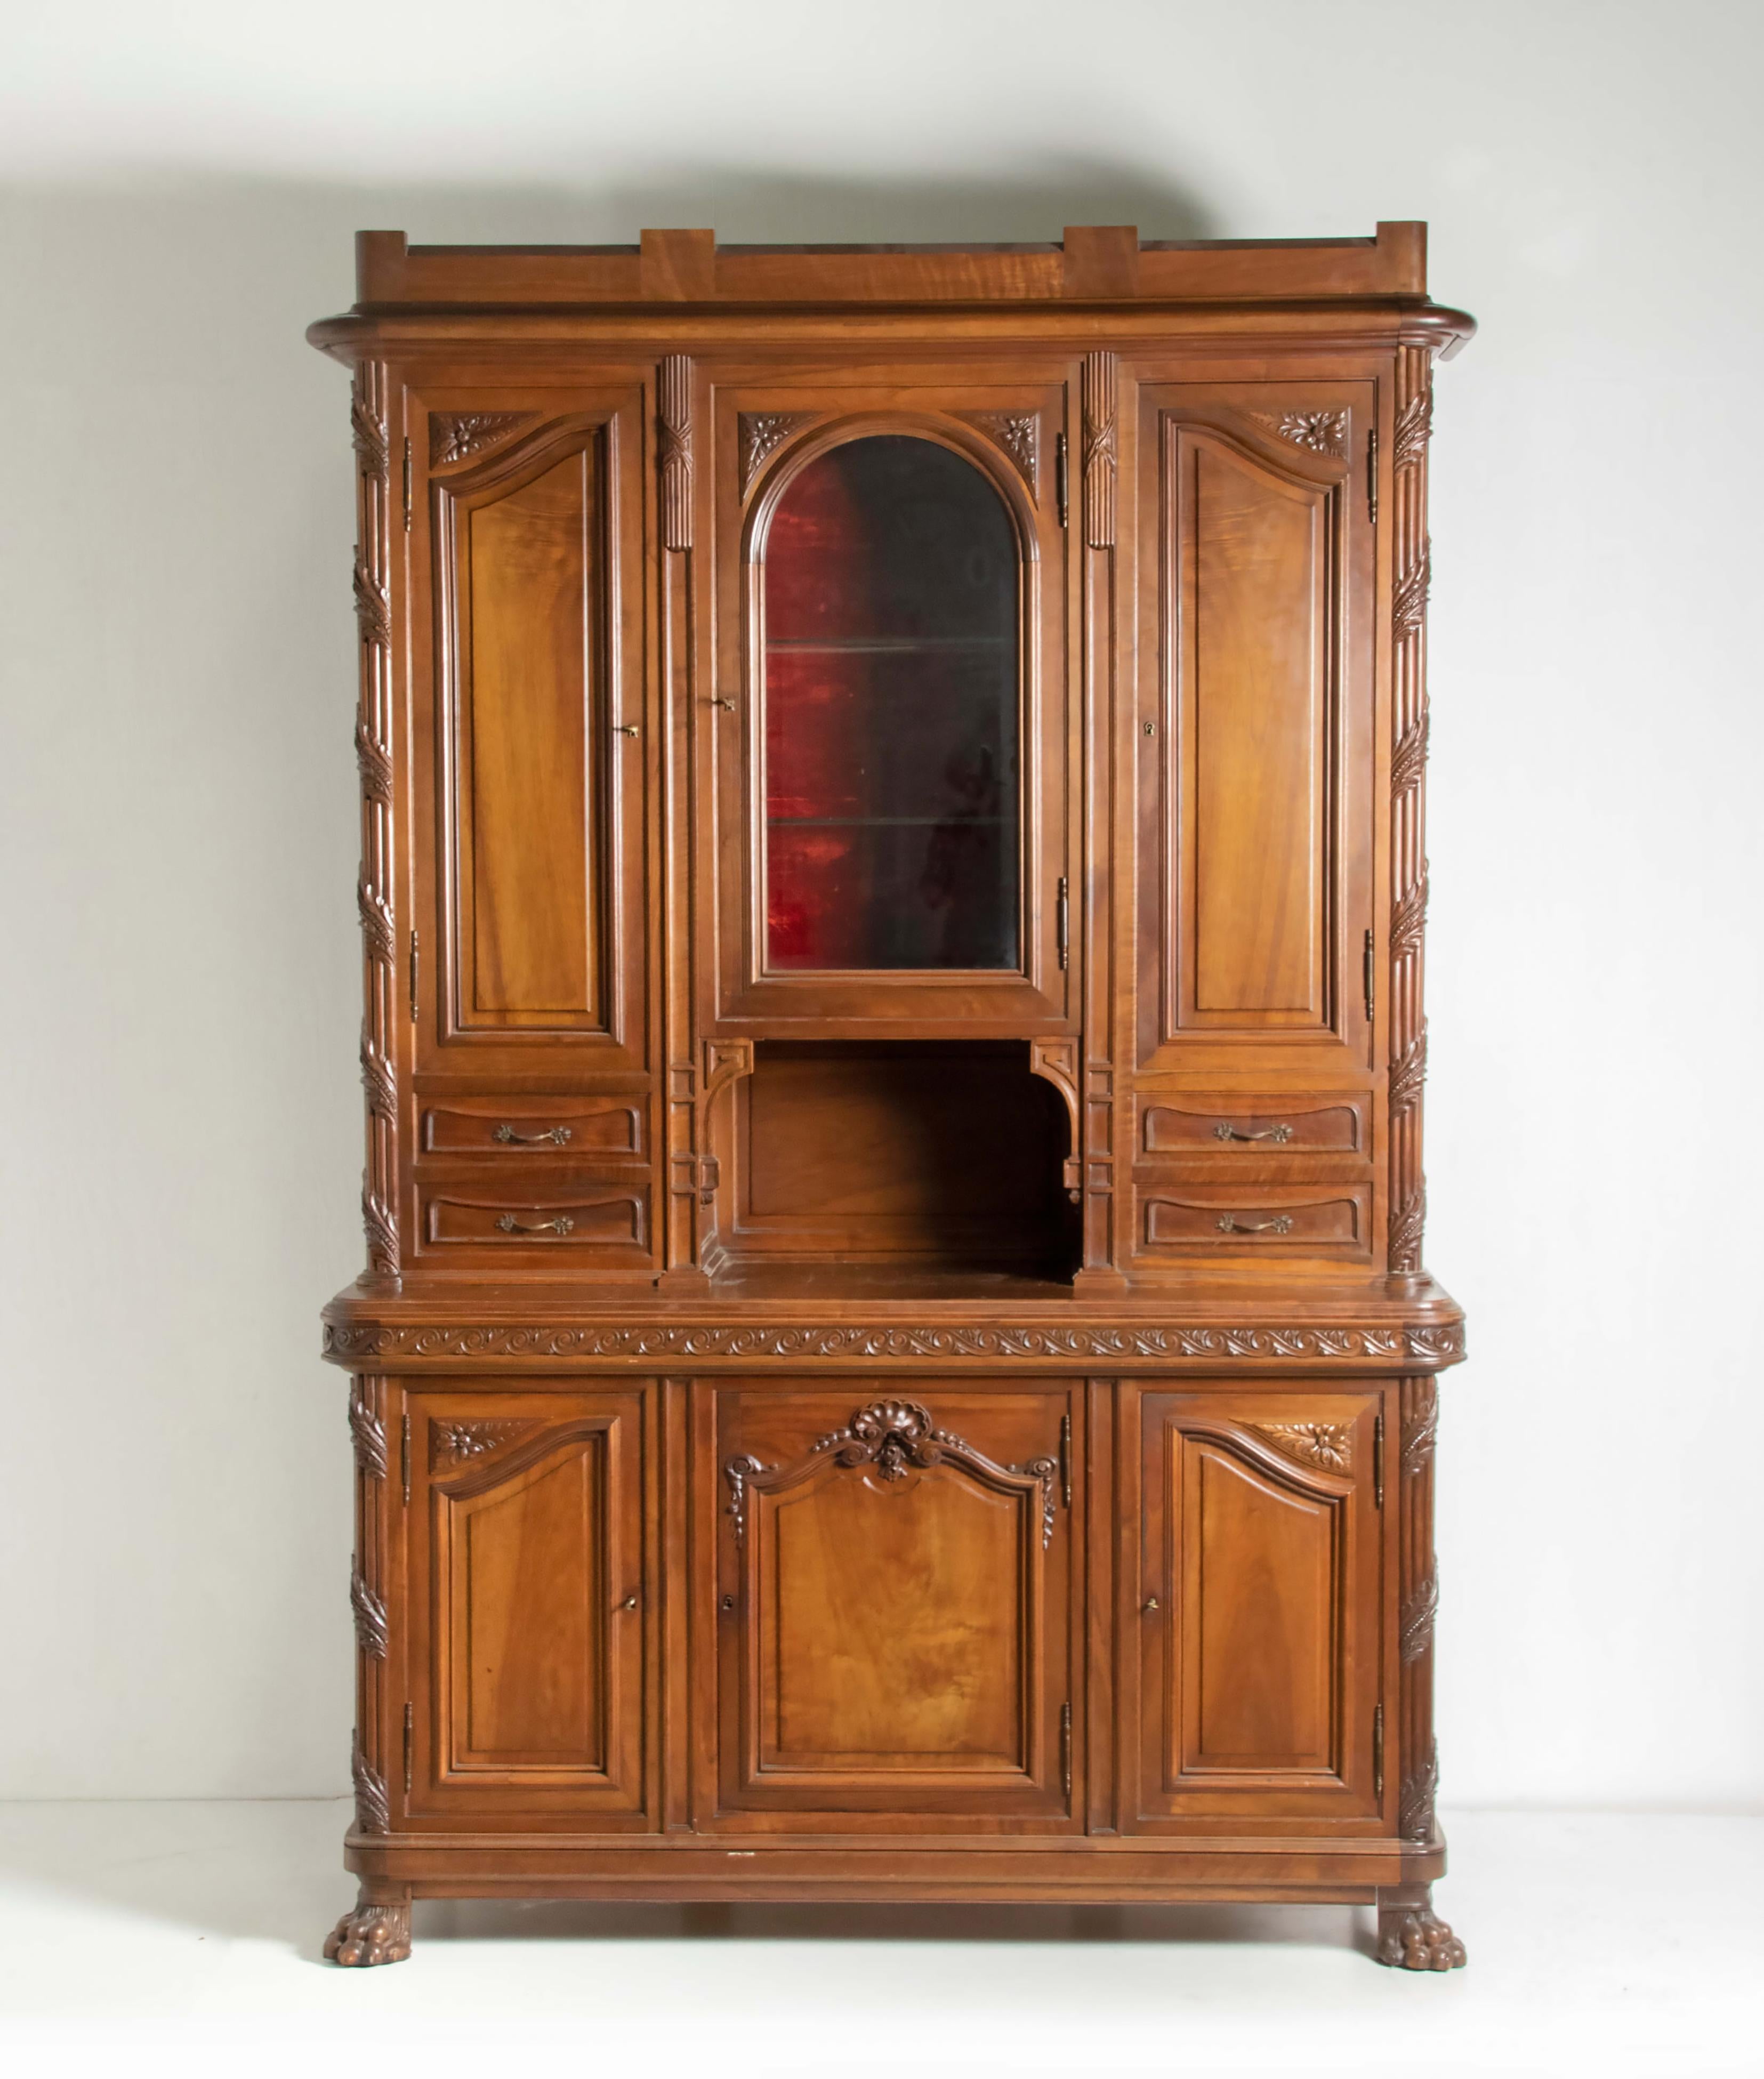 A late 19th century Louis XVI style solid walnut cabinet. Richly embellished with refined carving. At the center an arched glass door, the inside is lined with velvet fabric, originally this part was for storing silverware. The 
The lower part has